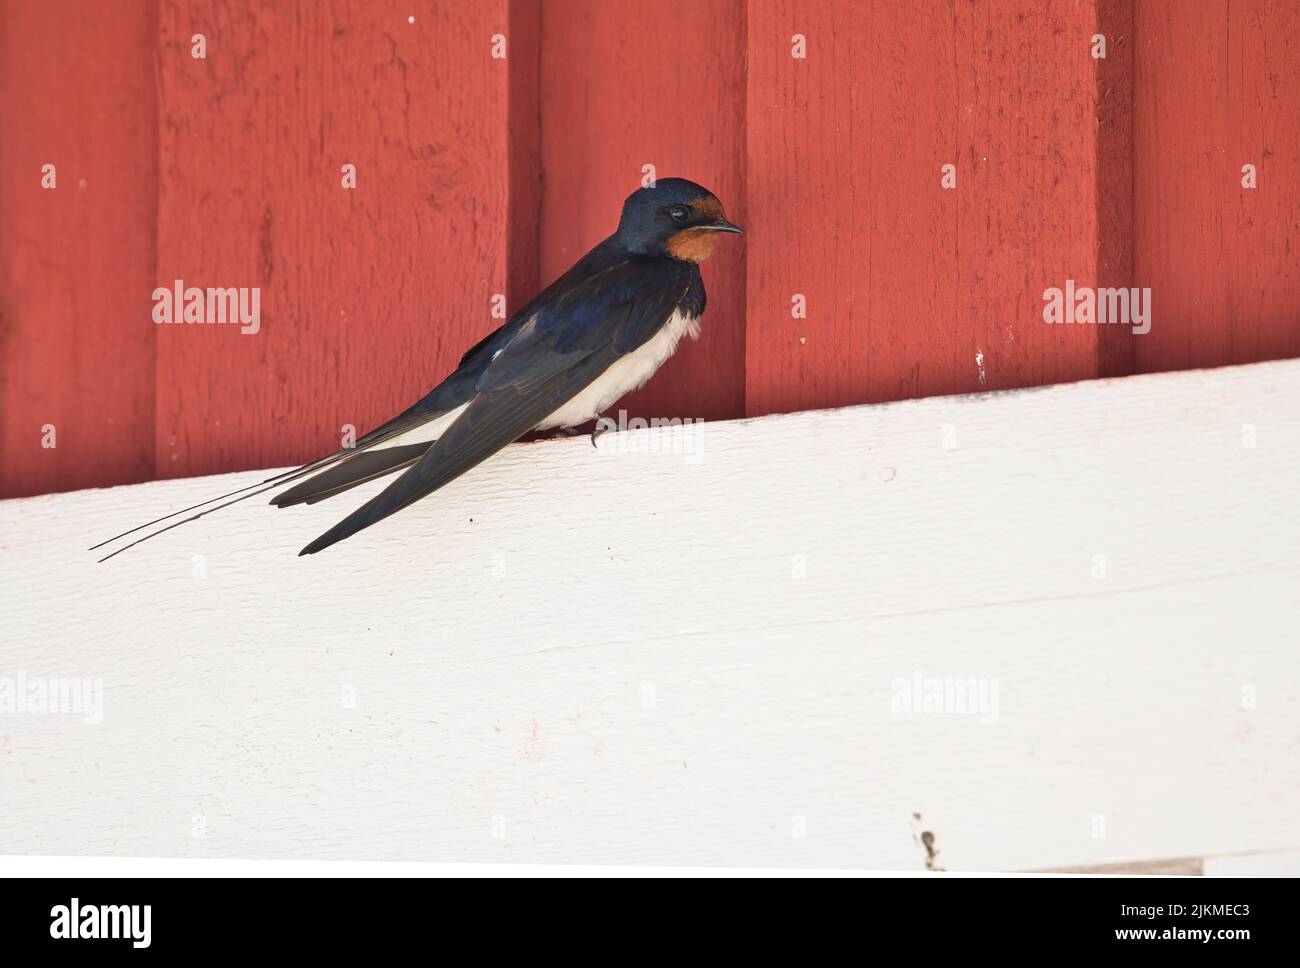 Swallow (Hirundo rustica), making use of an exterior light on a building as a perch Stock Photo